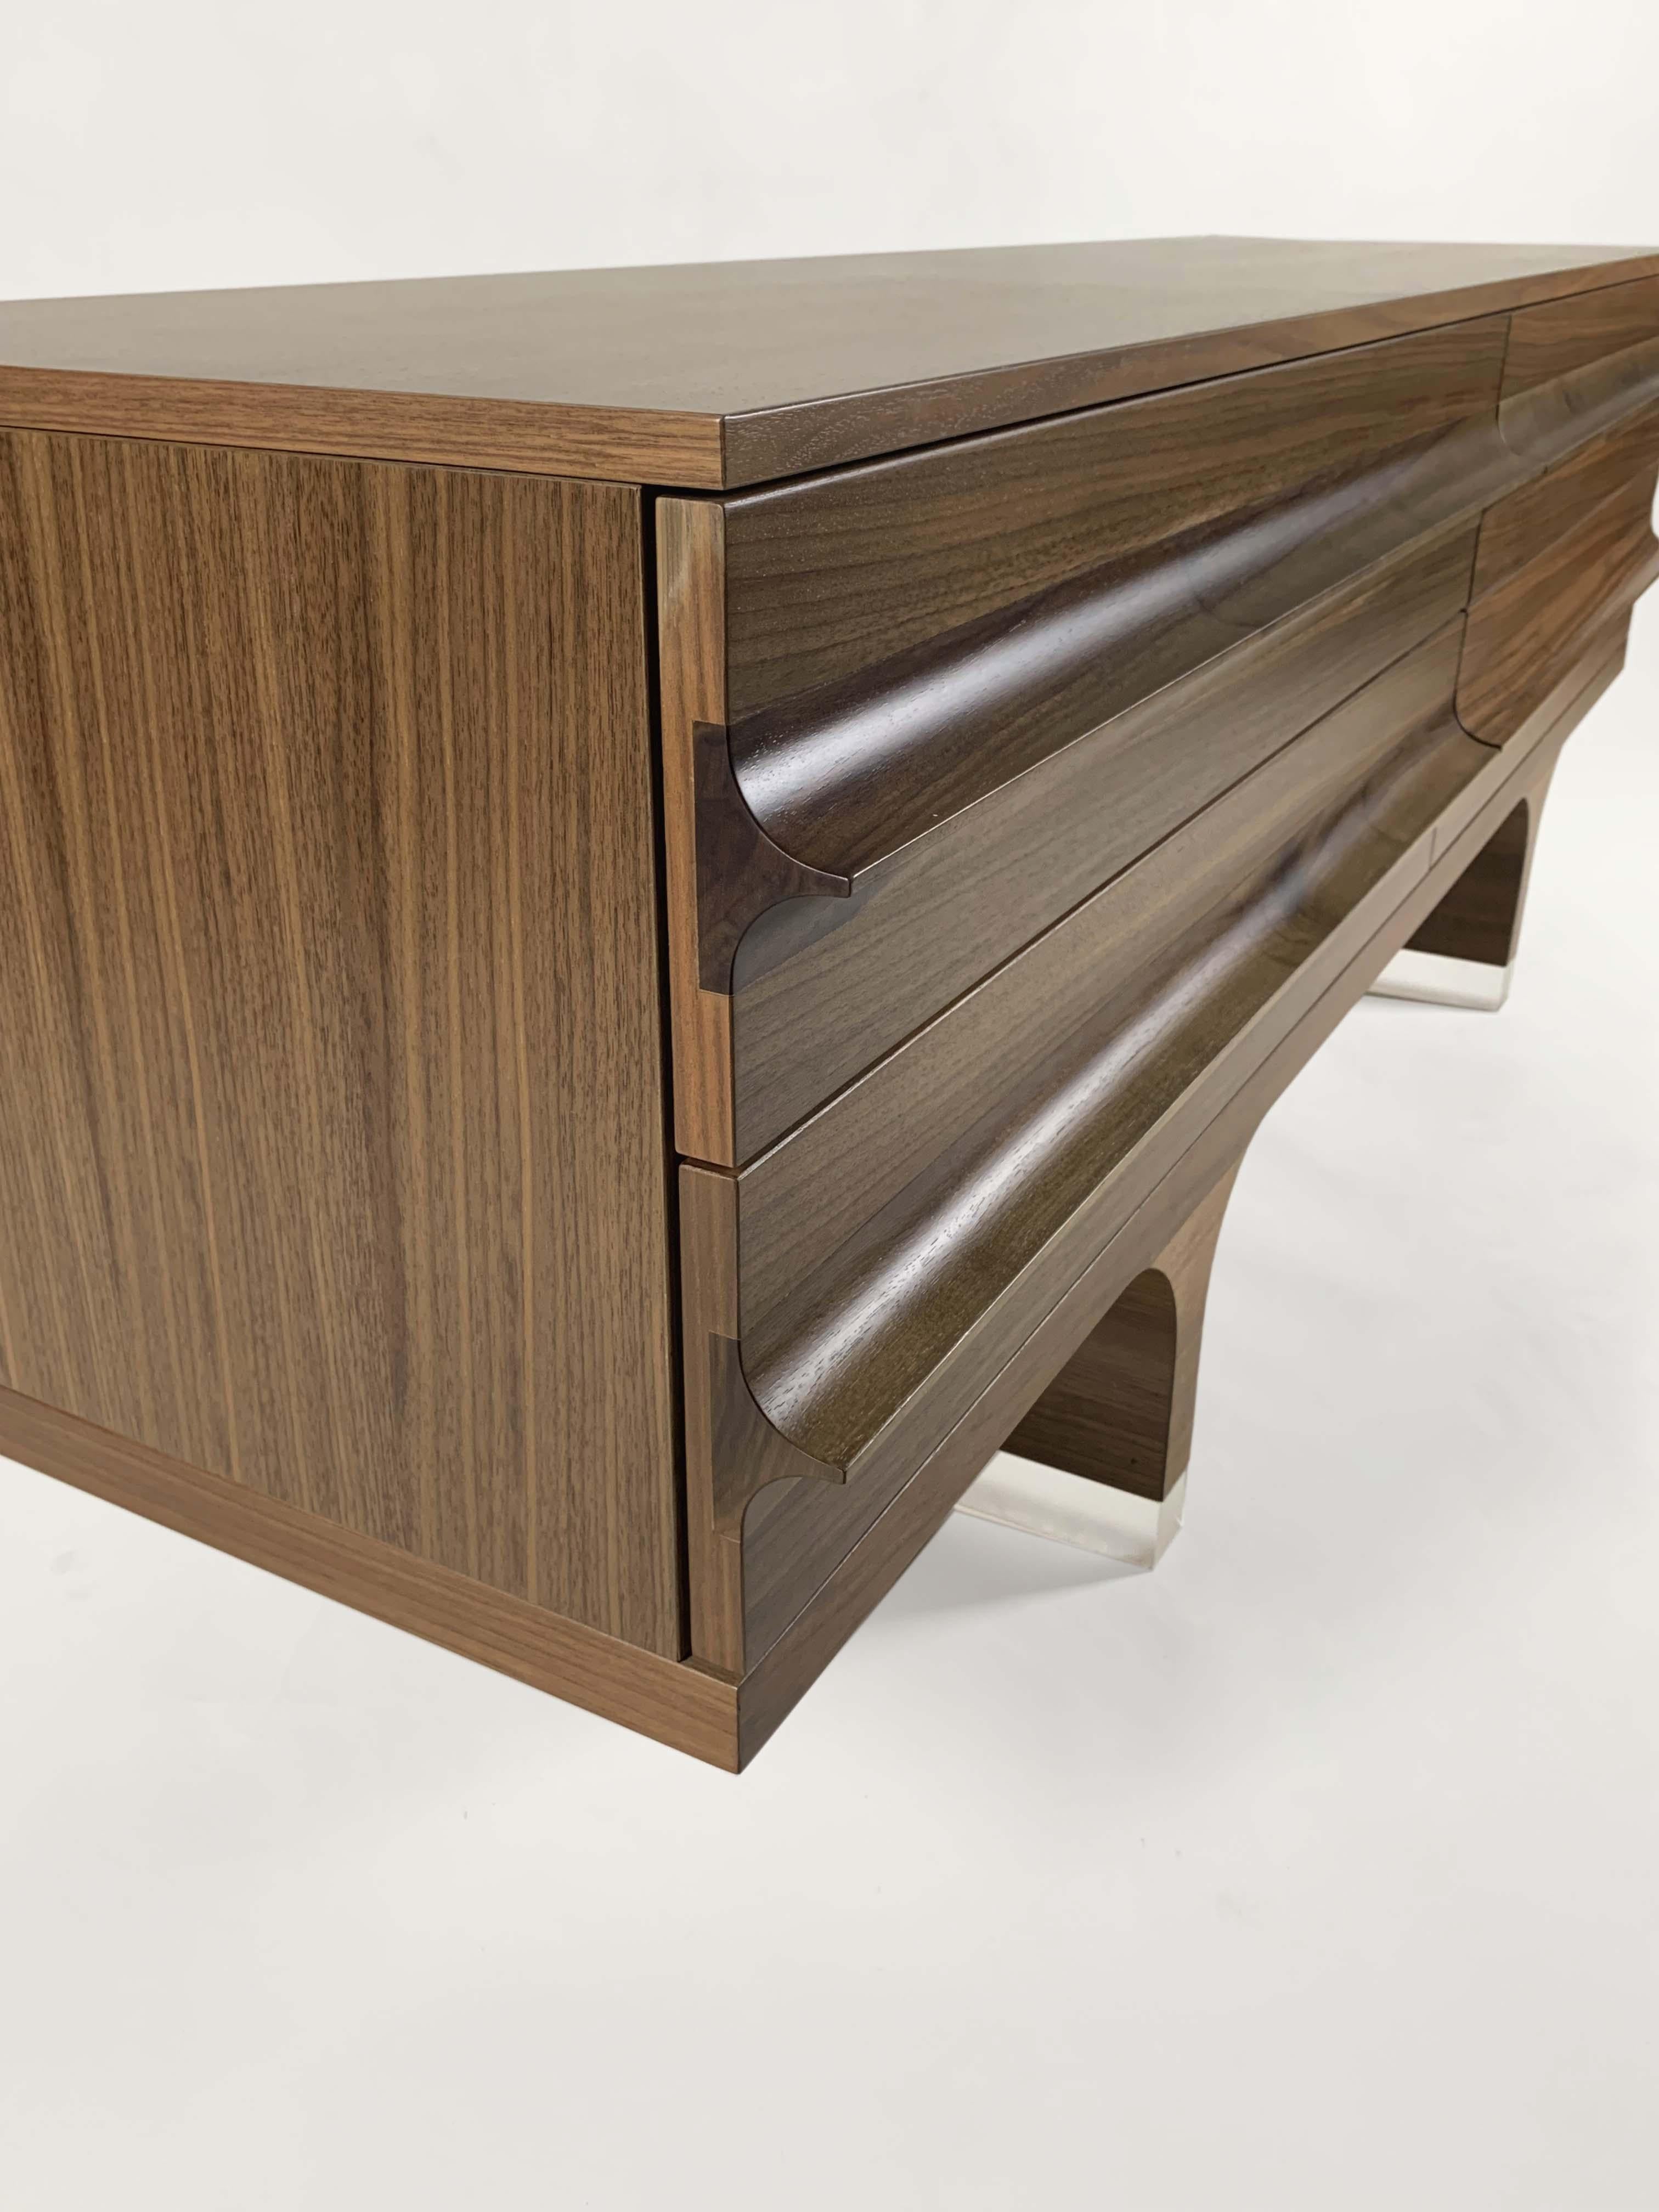 The 0+1 C sideboard was part of a living room product family designed by Franco Poli for Bernini in 2003. This series was characterized by the gentle lines, as seen in the long structural handle running along the entire length of the product,